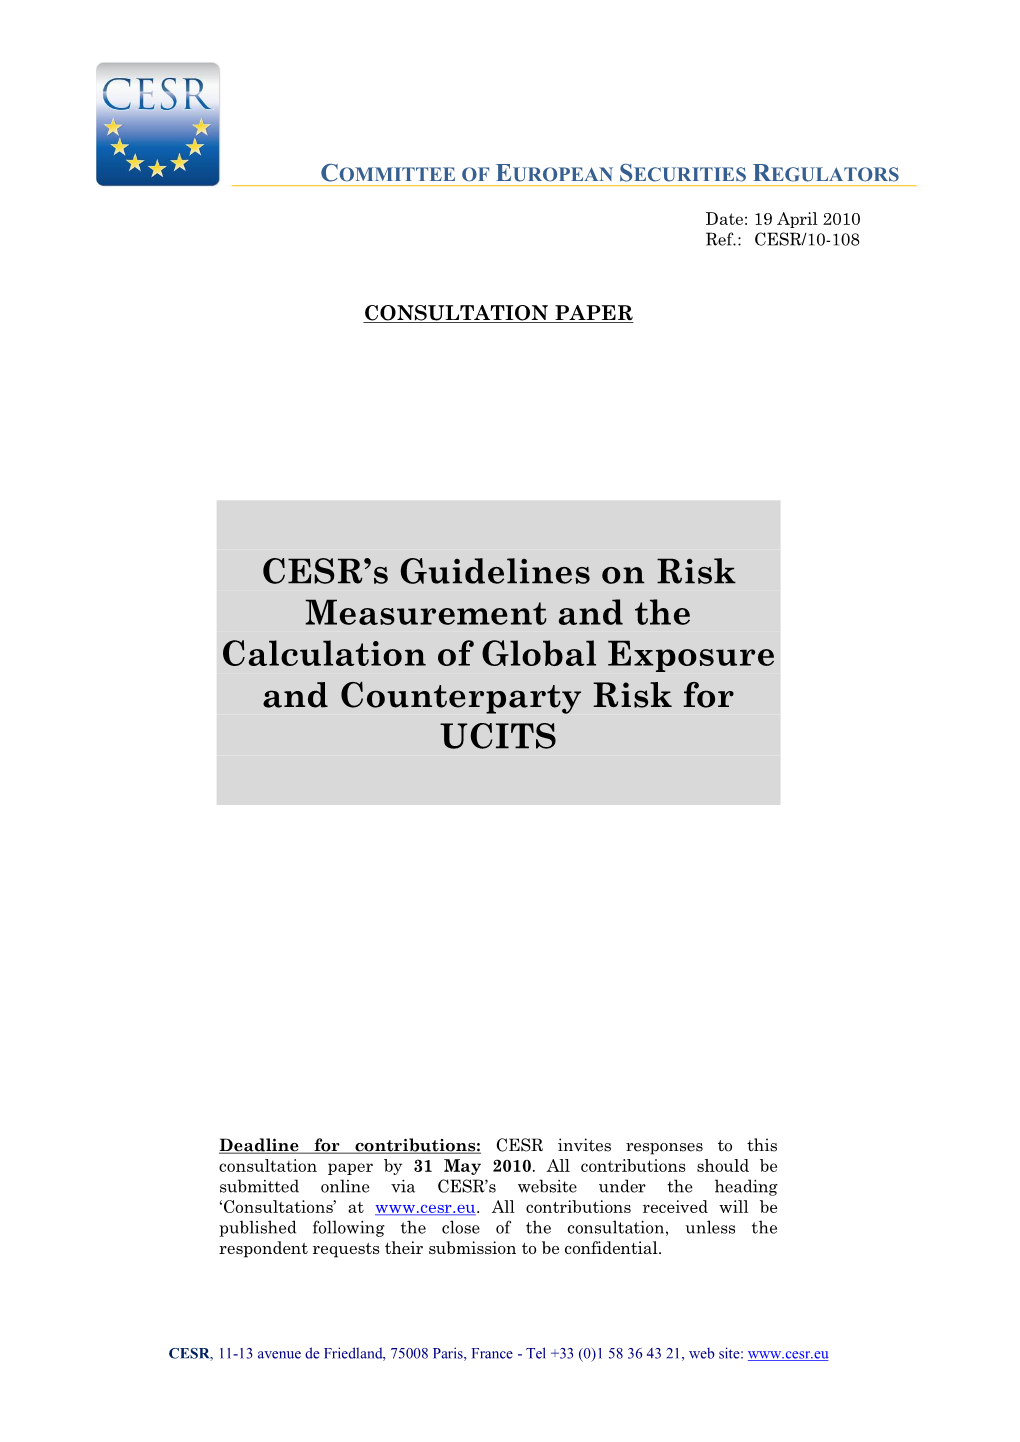 CESR's Guidelines on Risk Measurement and the Calculation